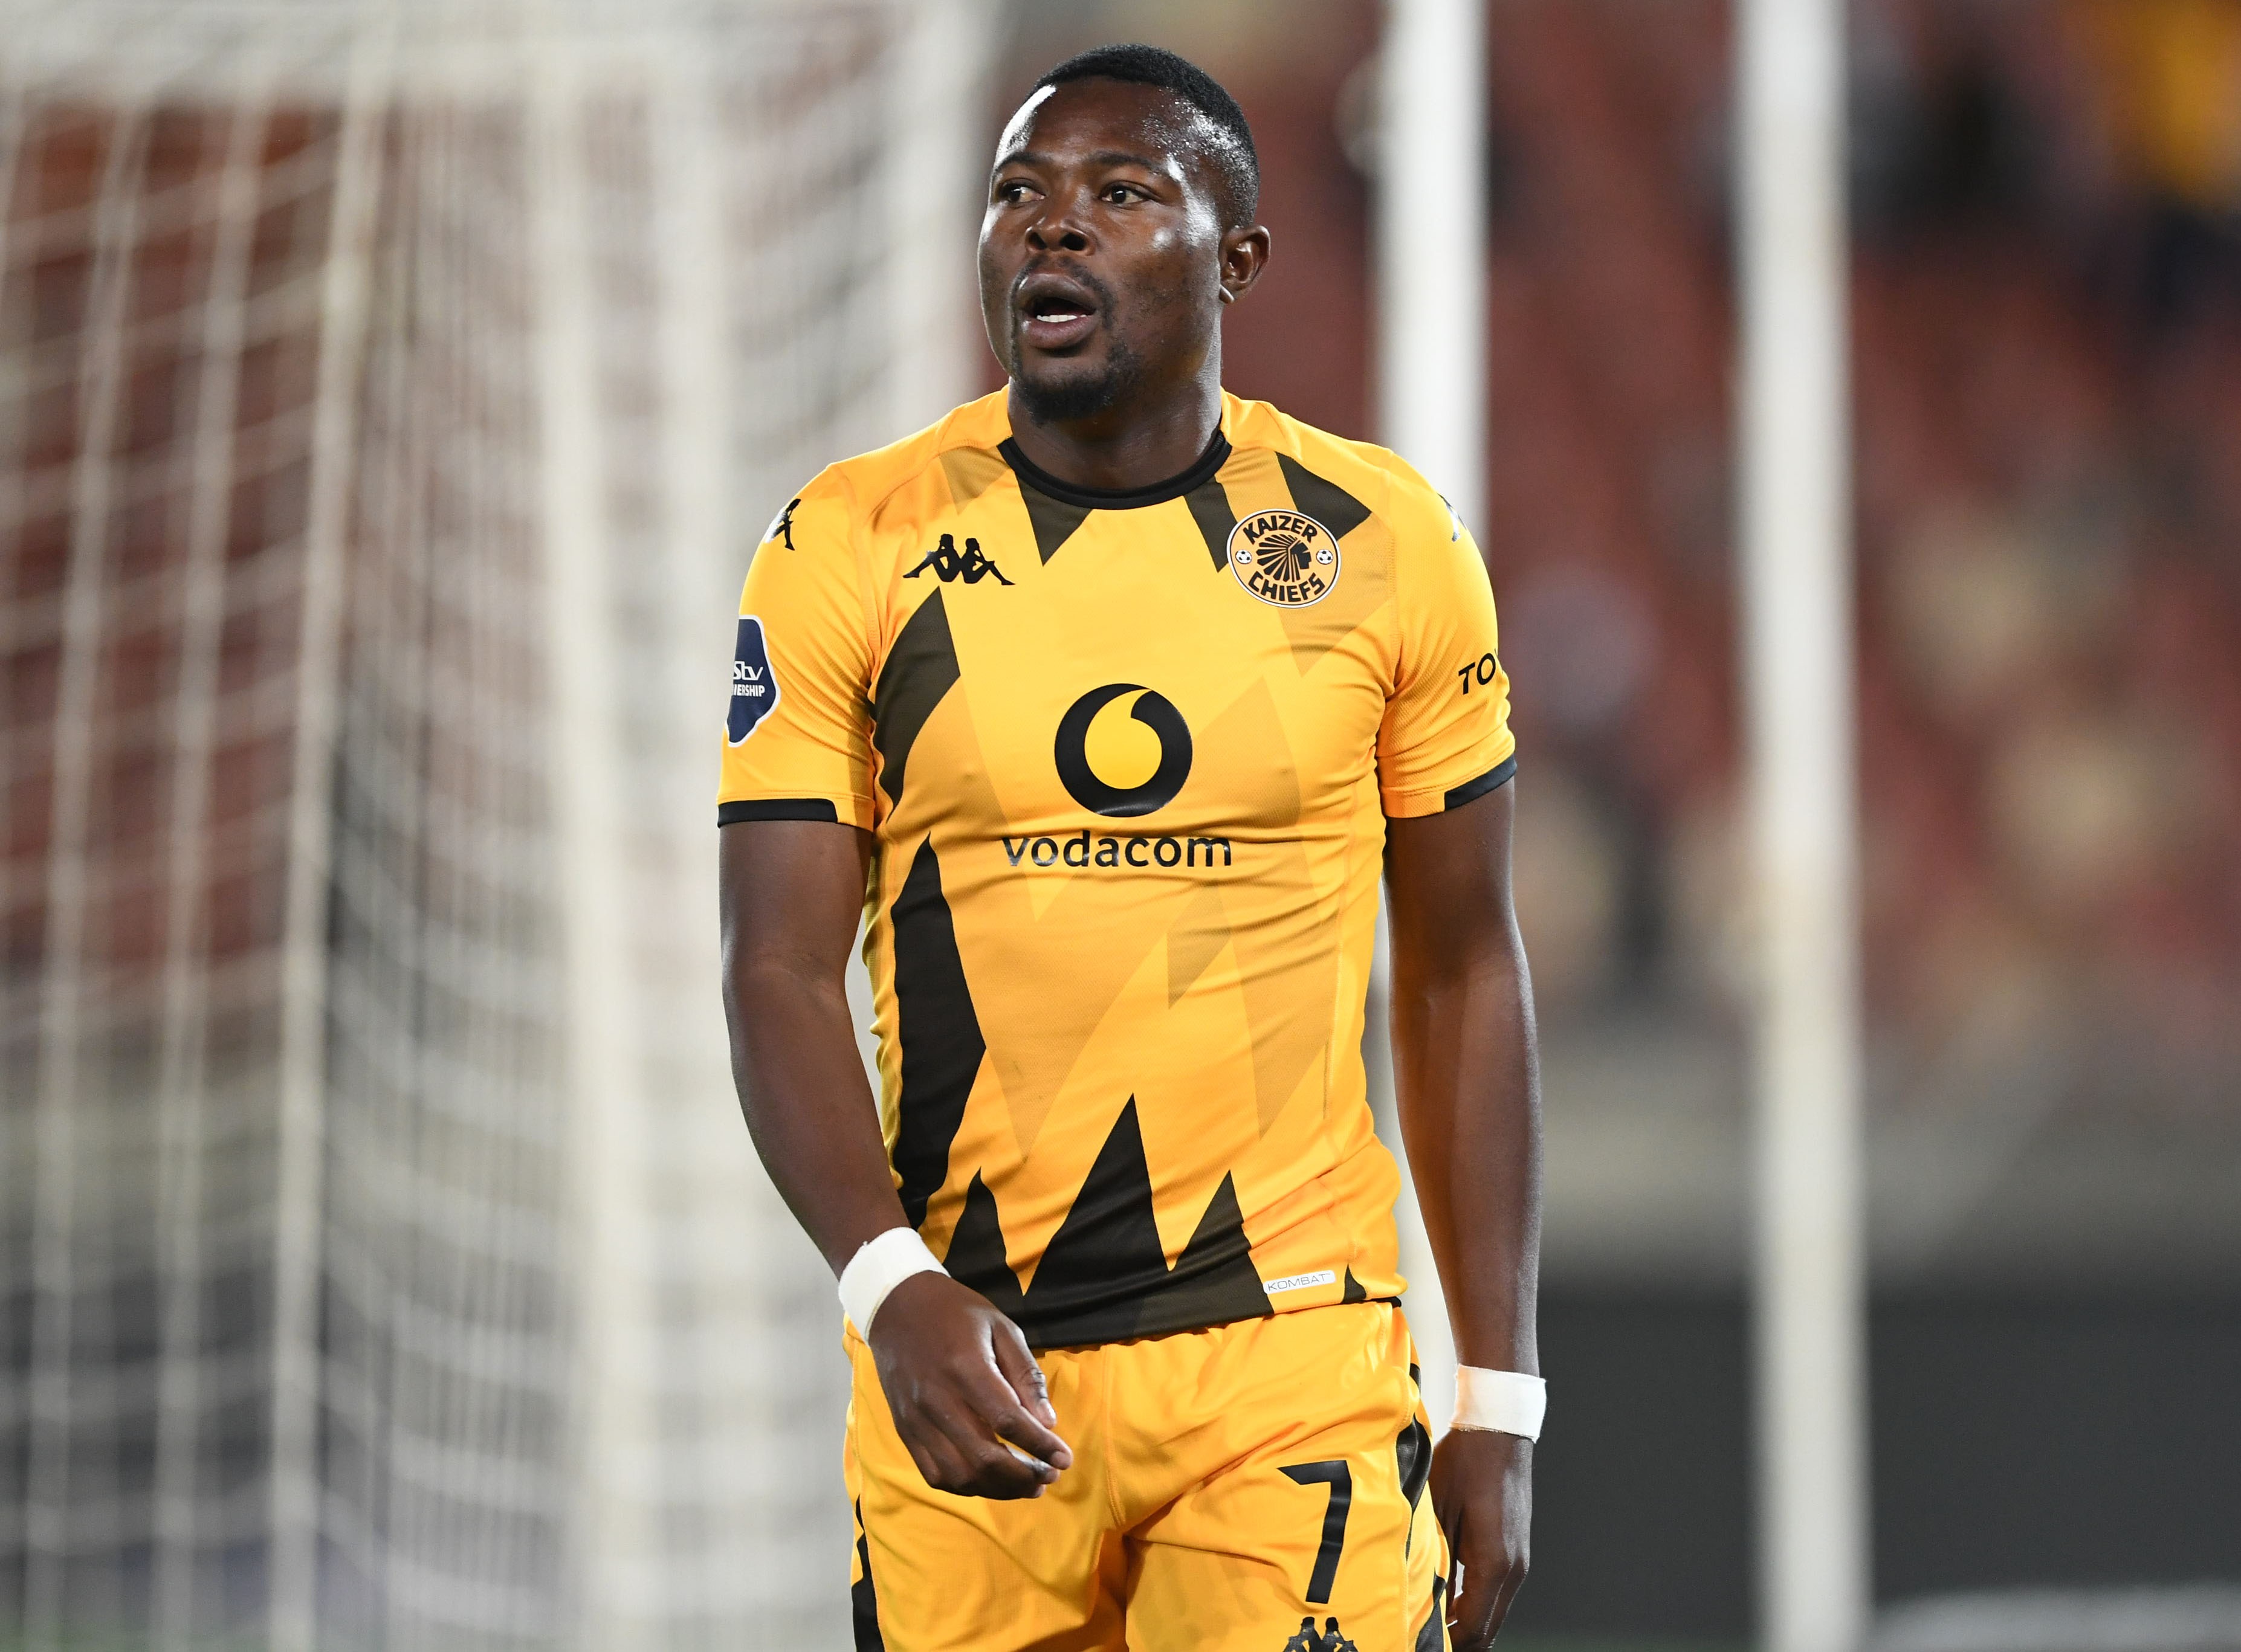 A striker's take: Why Chivaviro has flopped at Chiefs